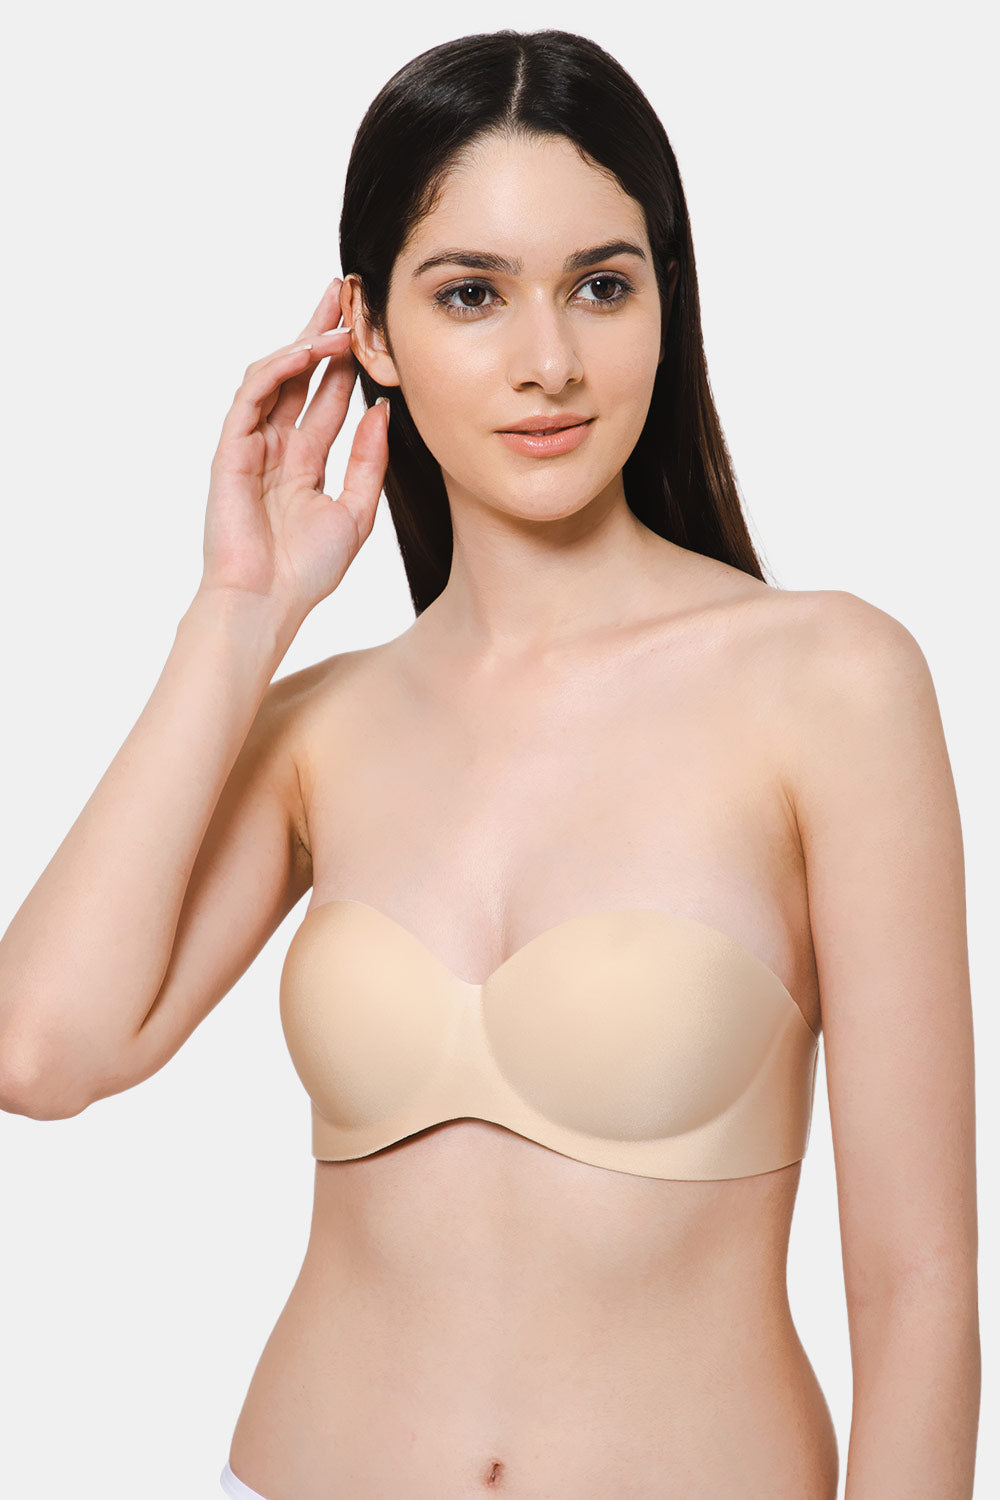 Dirie Strapless Clear Strap Backless Bra for Women India